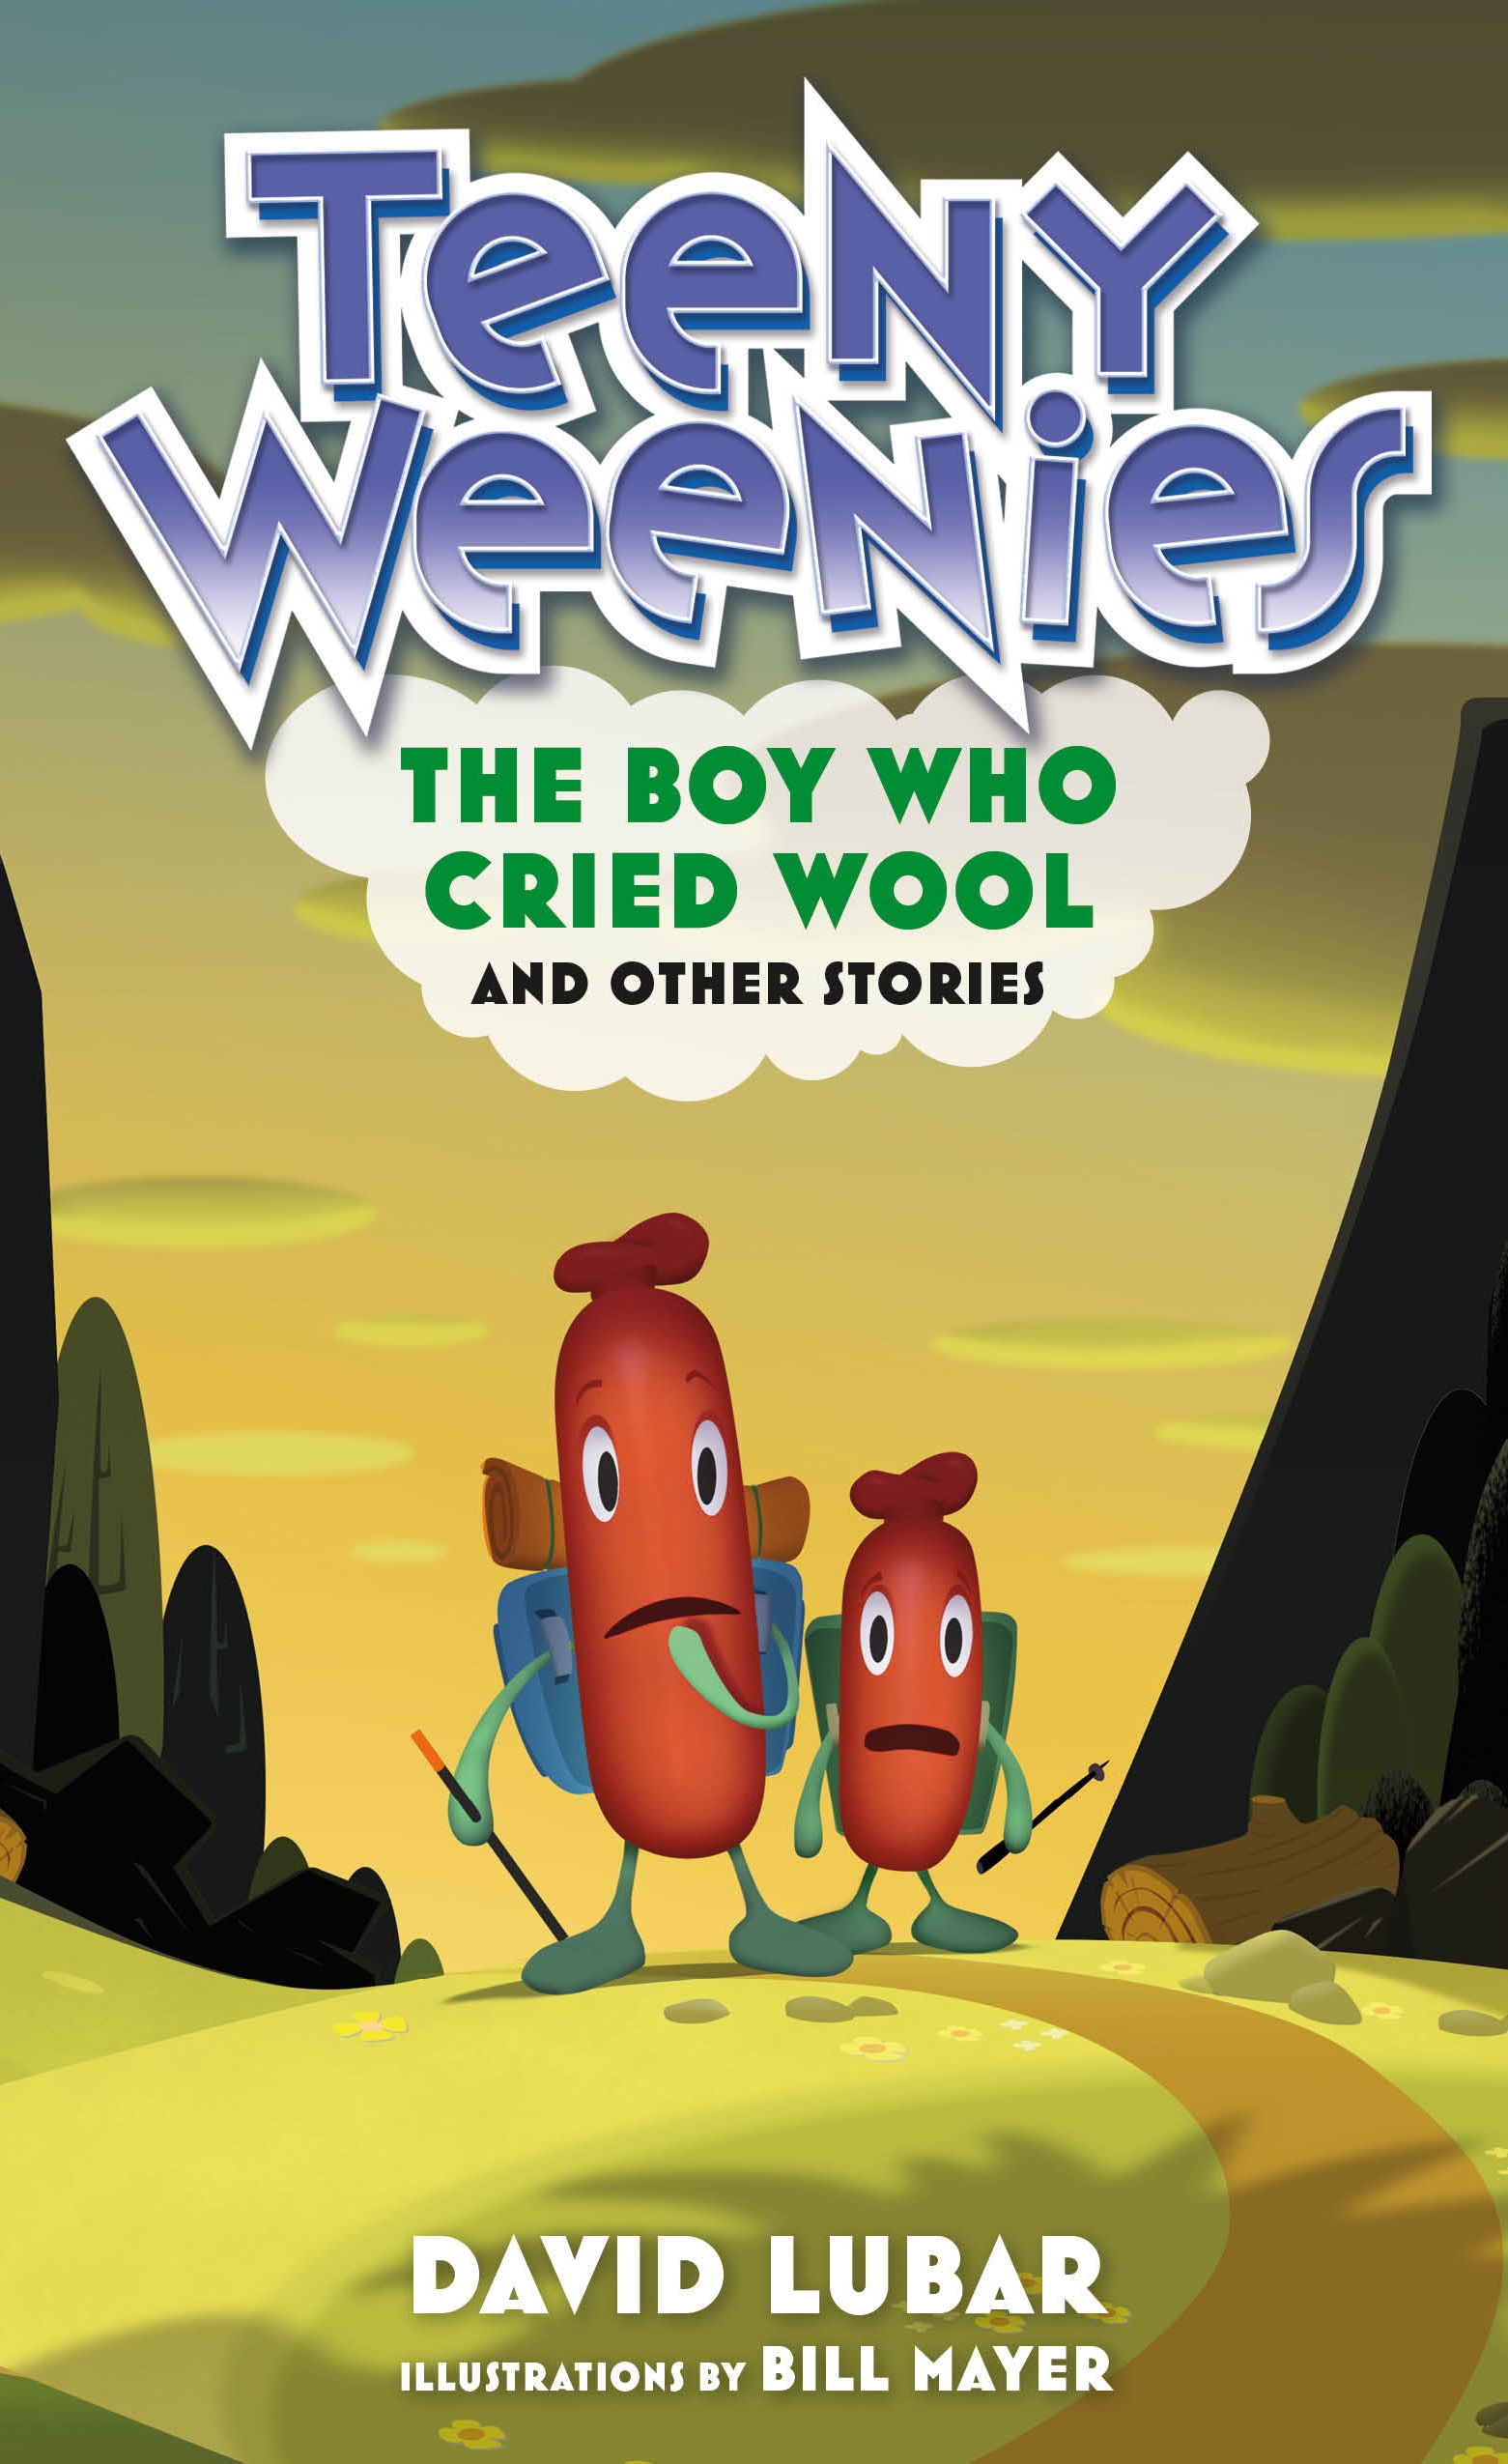 Teeny Weenies: The Boy Who Cried Wool : And Other Stories by David Lubar